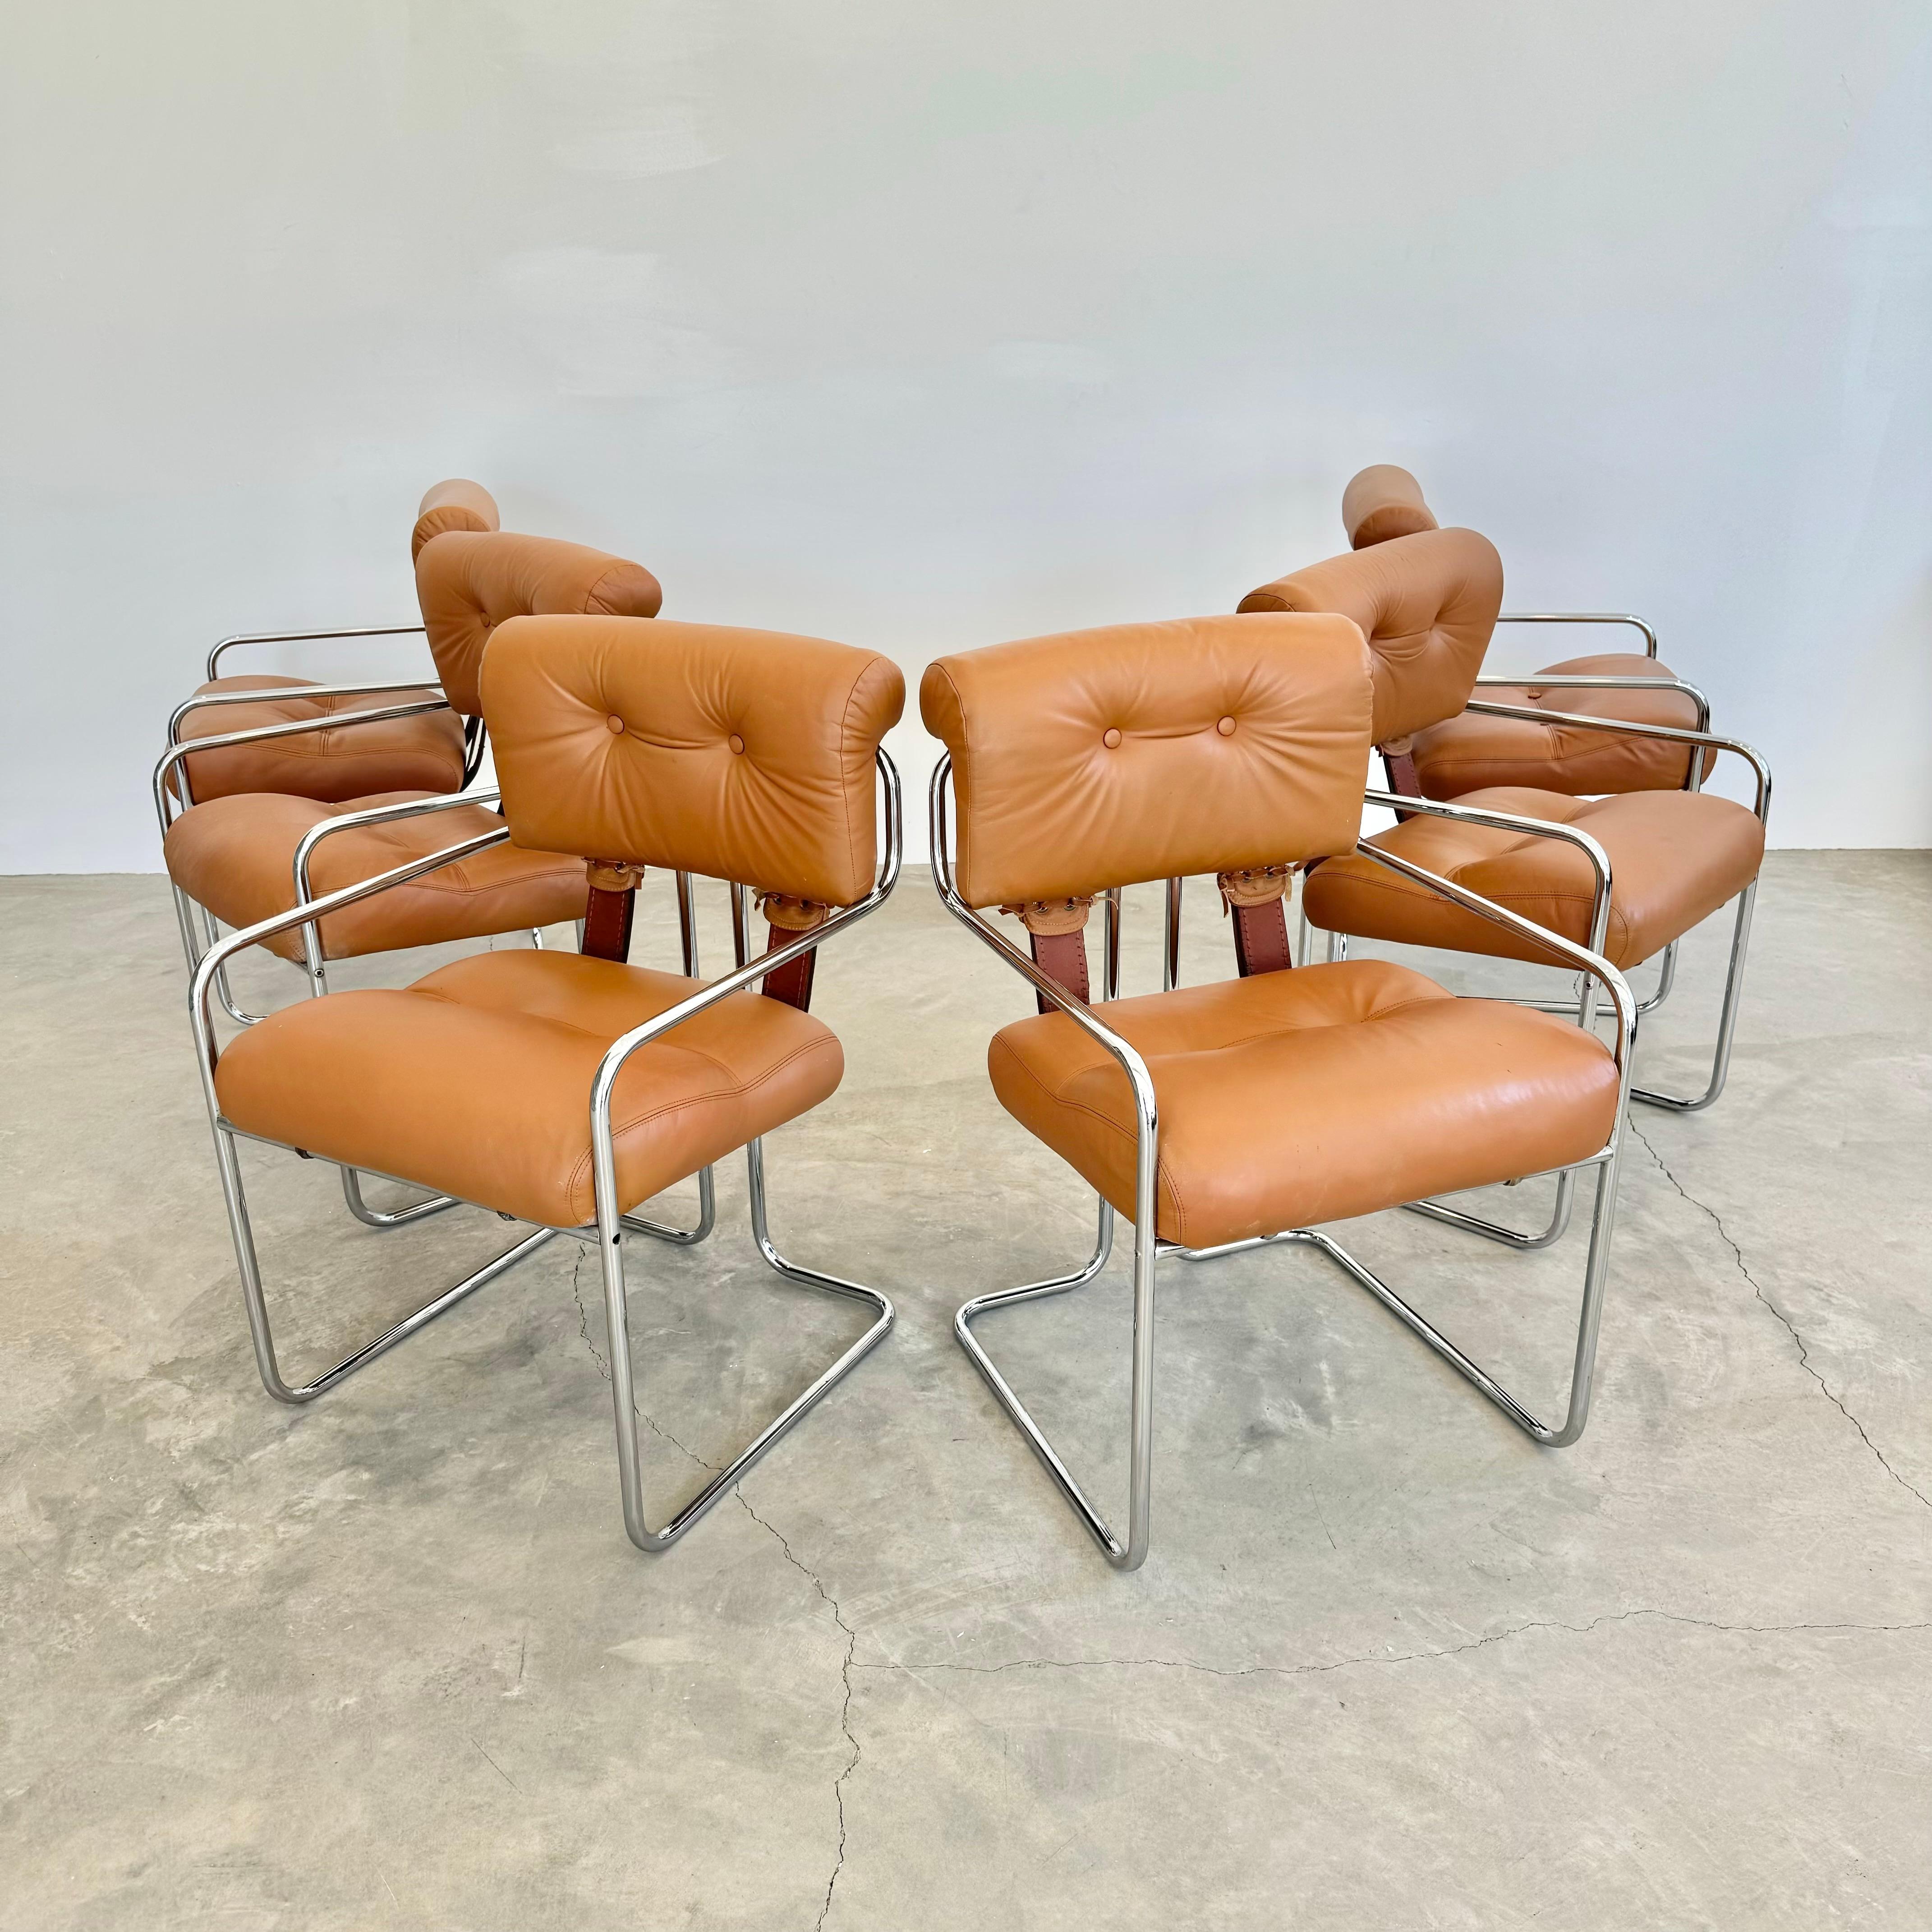 Stunning set of 6 Tucroma chairs by Guido Faleschini for Mariani, Pace. Beautiful, original, tan leather seats and seat backs along with classic chrome tube frame. A staple of beautiful modern Italian design, these chairs will transform any room or